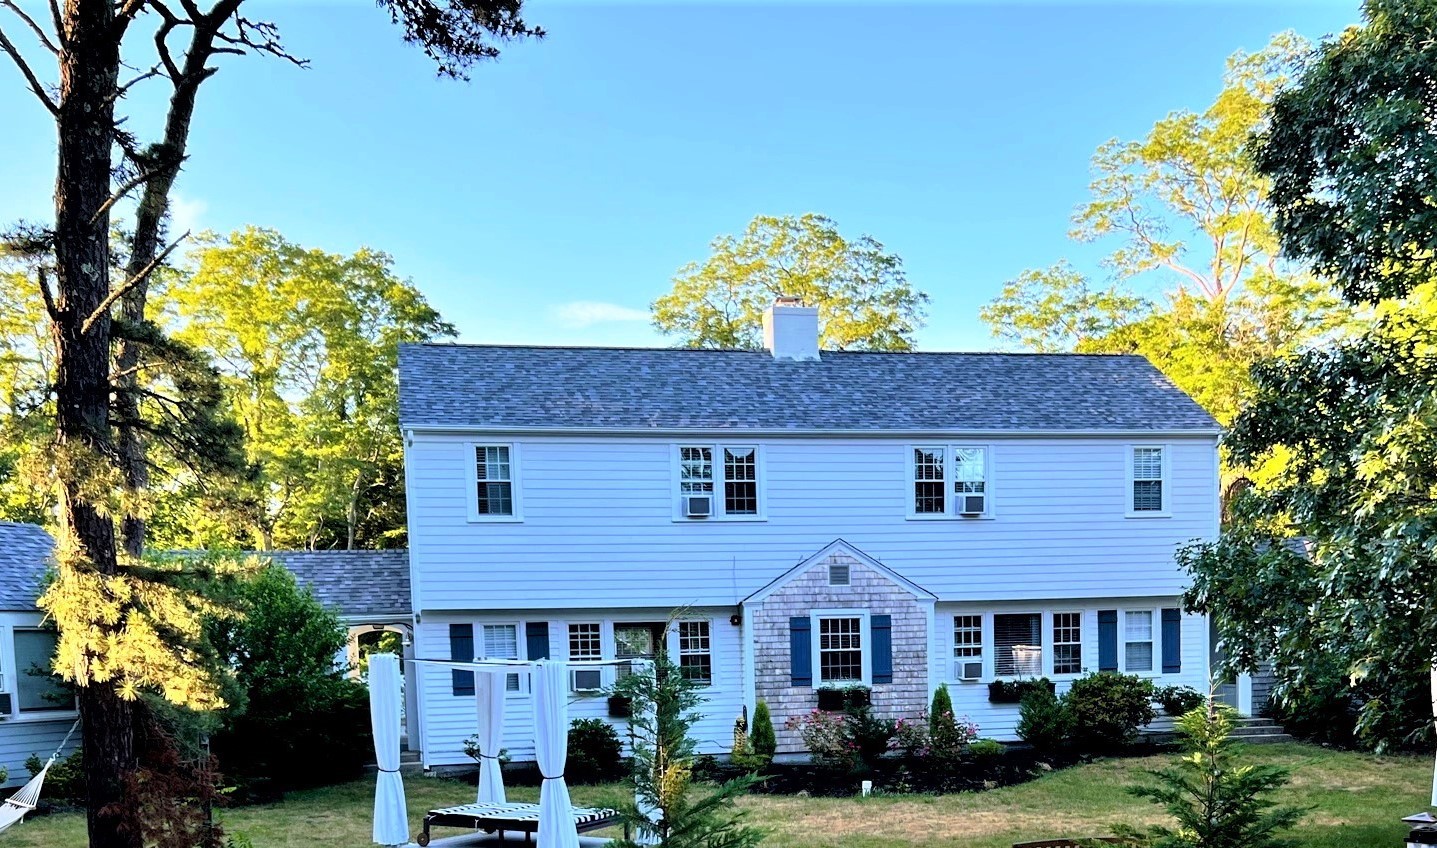 Massachusetts bed and breakfast inn for sale - The Seagrove (Cape Cod)